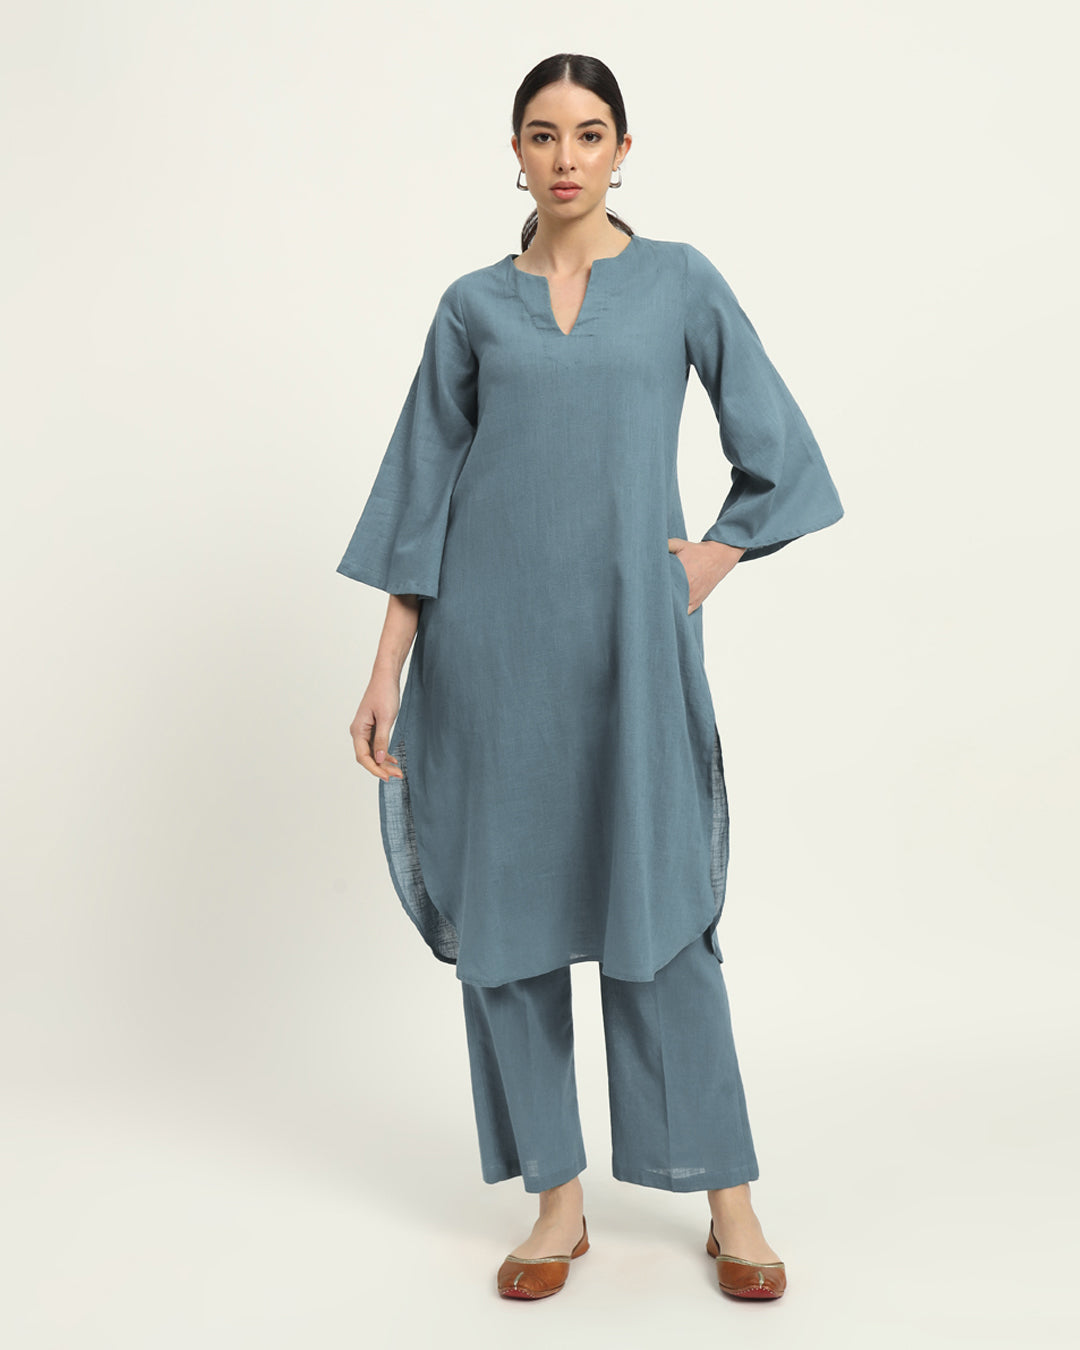 Combo: Blue Dawn & Plum Passion Rounded Reverie Solid Kurta